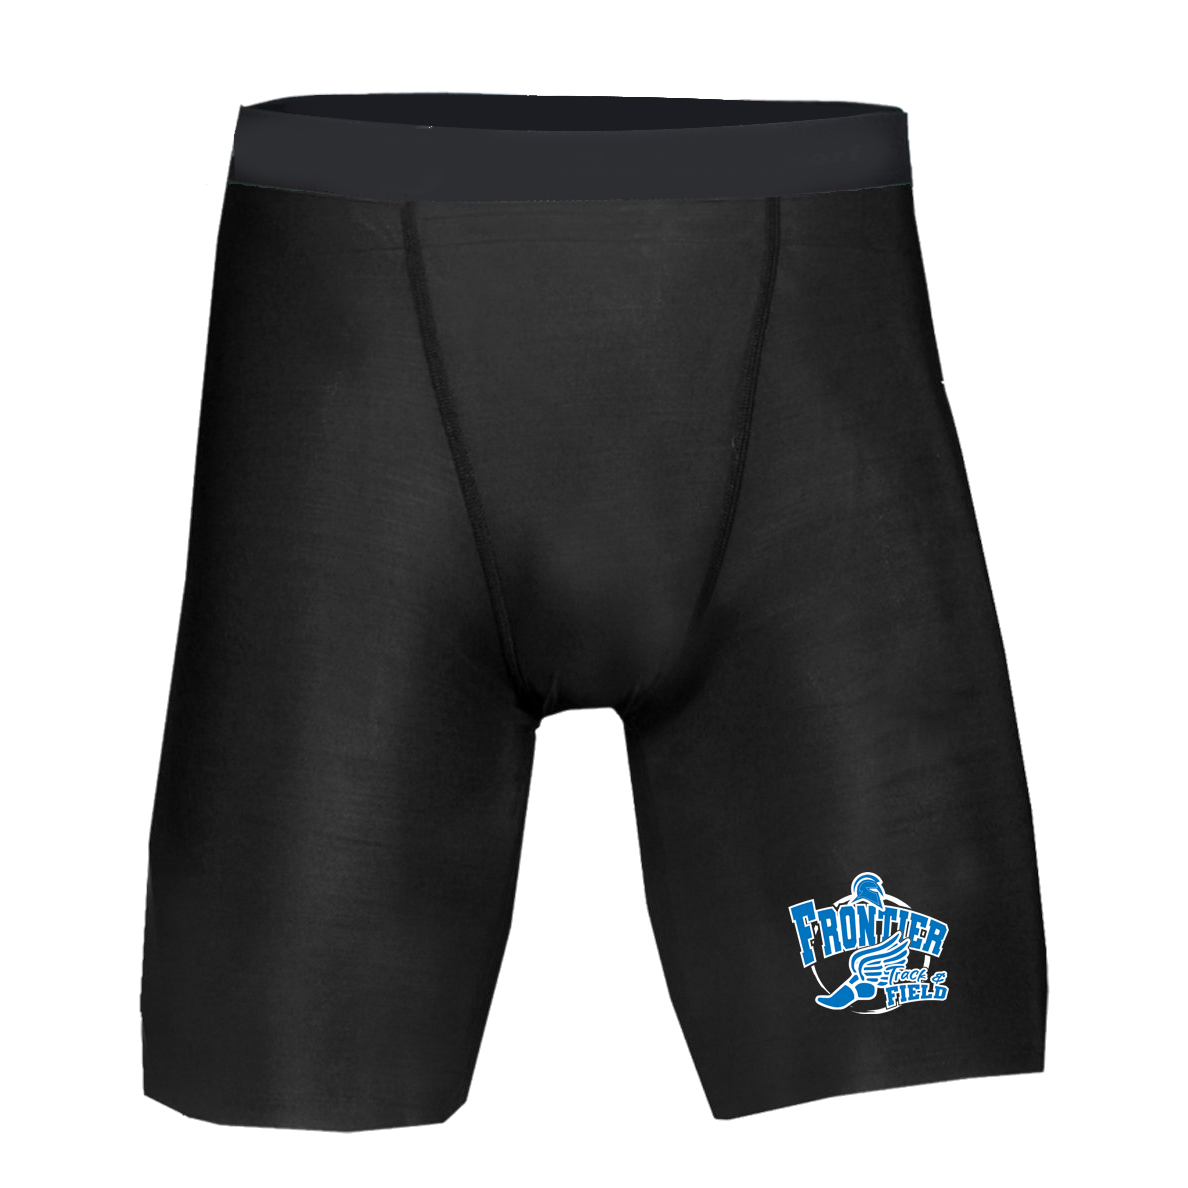 Frontier Track & Field Compression Short